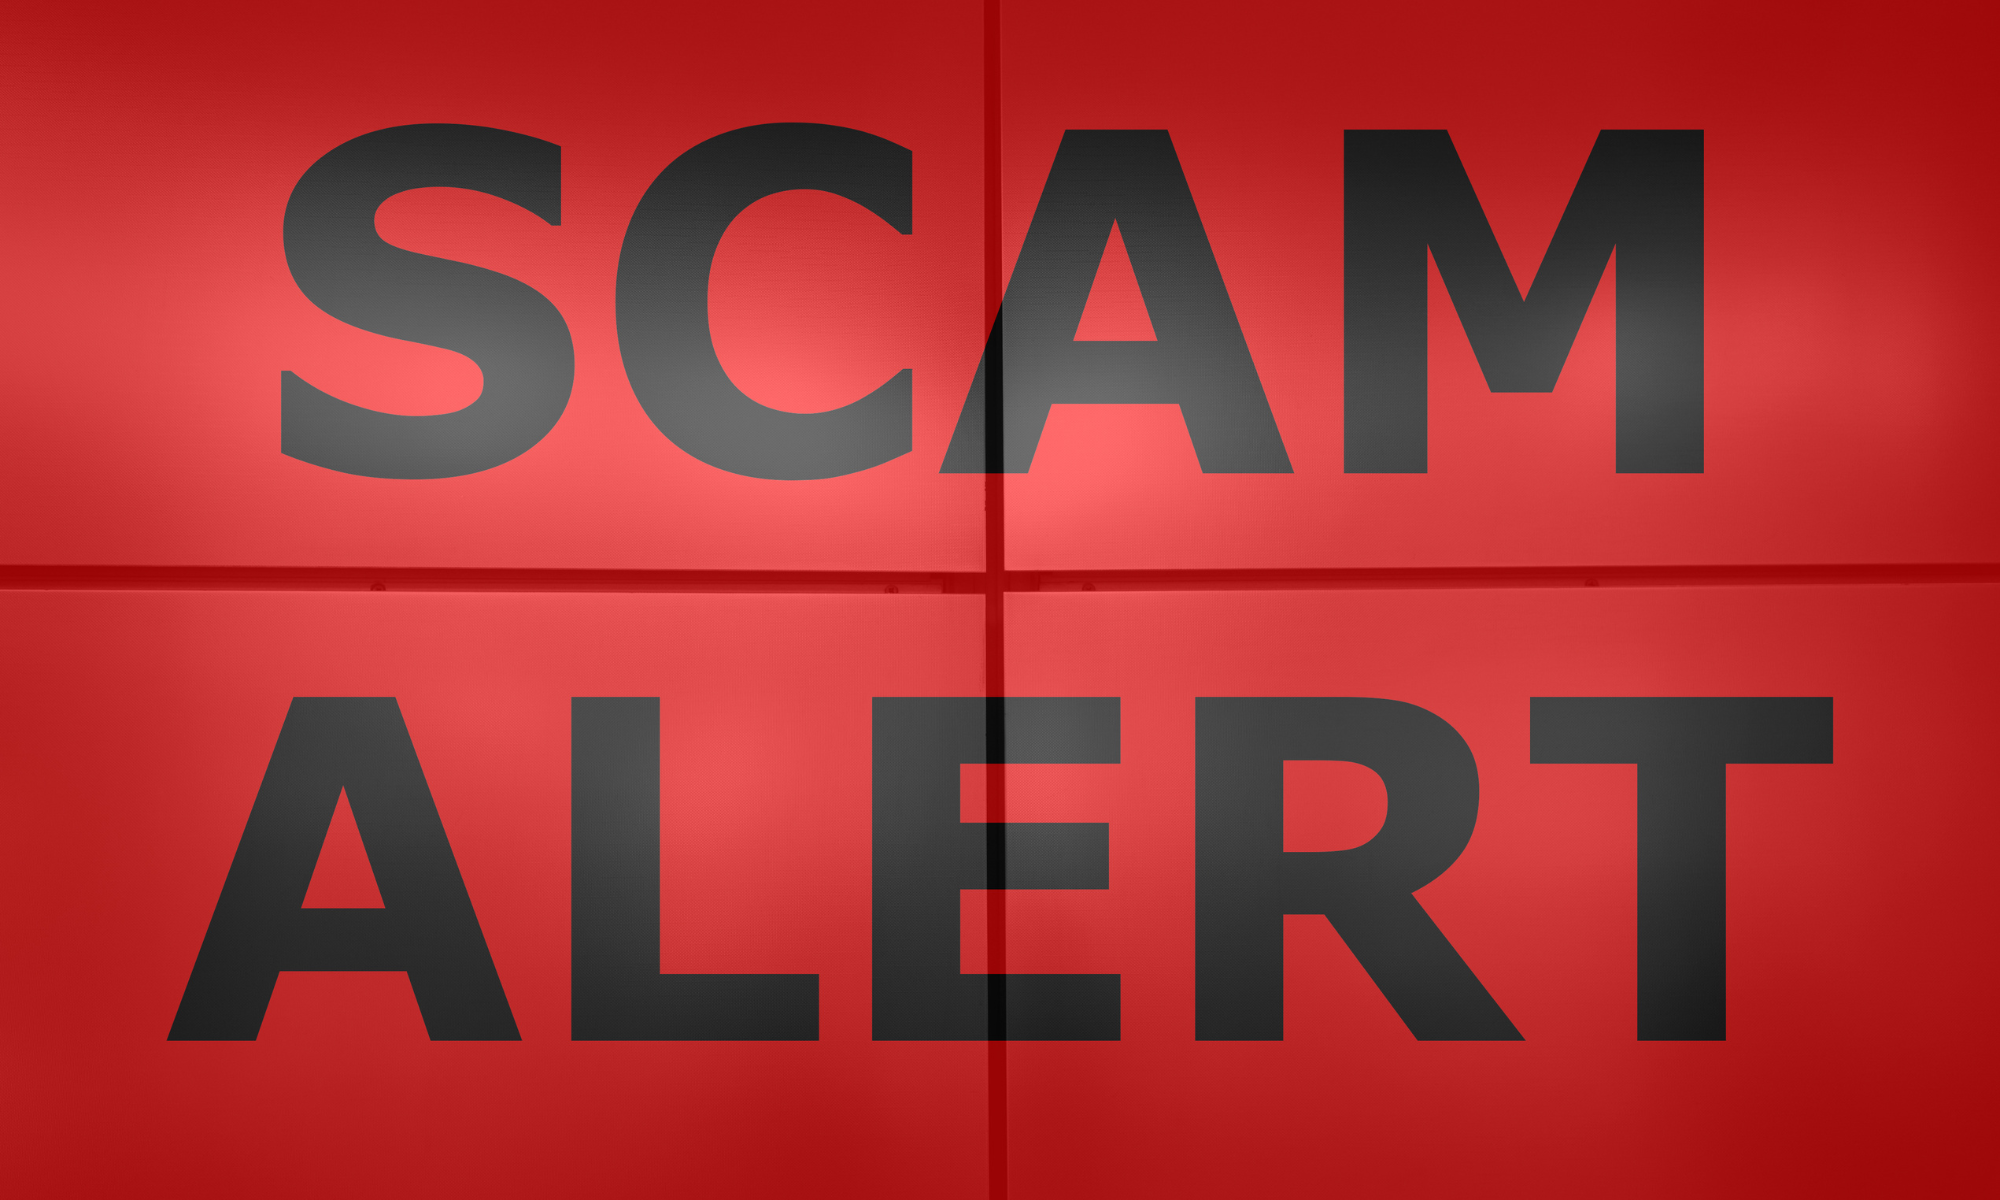 Don’t Get Tricked! How Delivery Scams Are Stealing More Than Your Gifts.